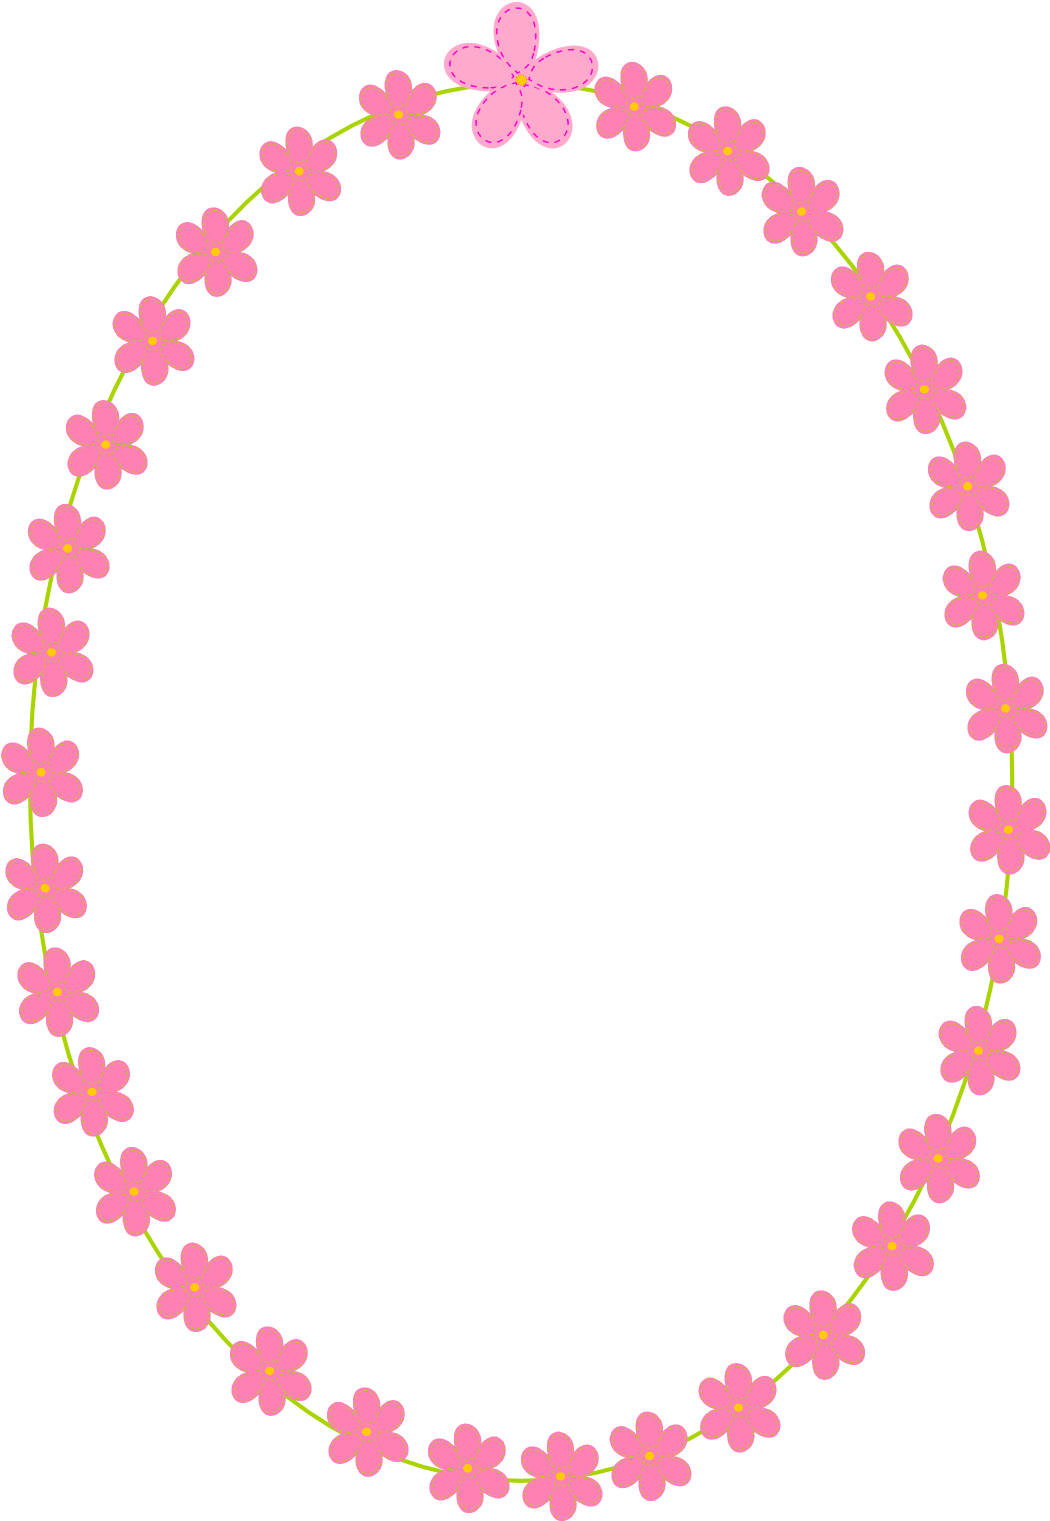 Featured image of post Transparent Background Free Digital Stickers Png - Pngkey provides millions of hd png images for free download.